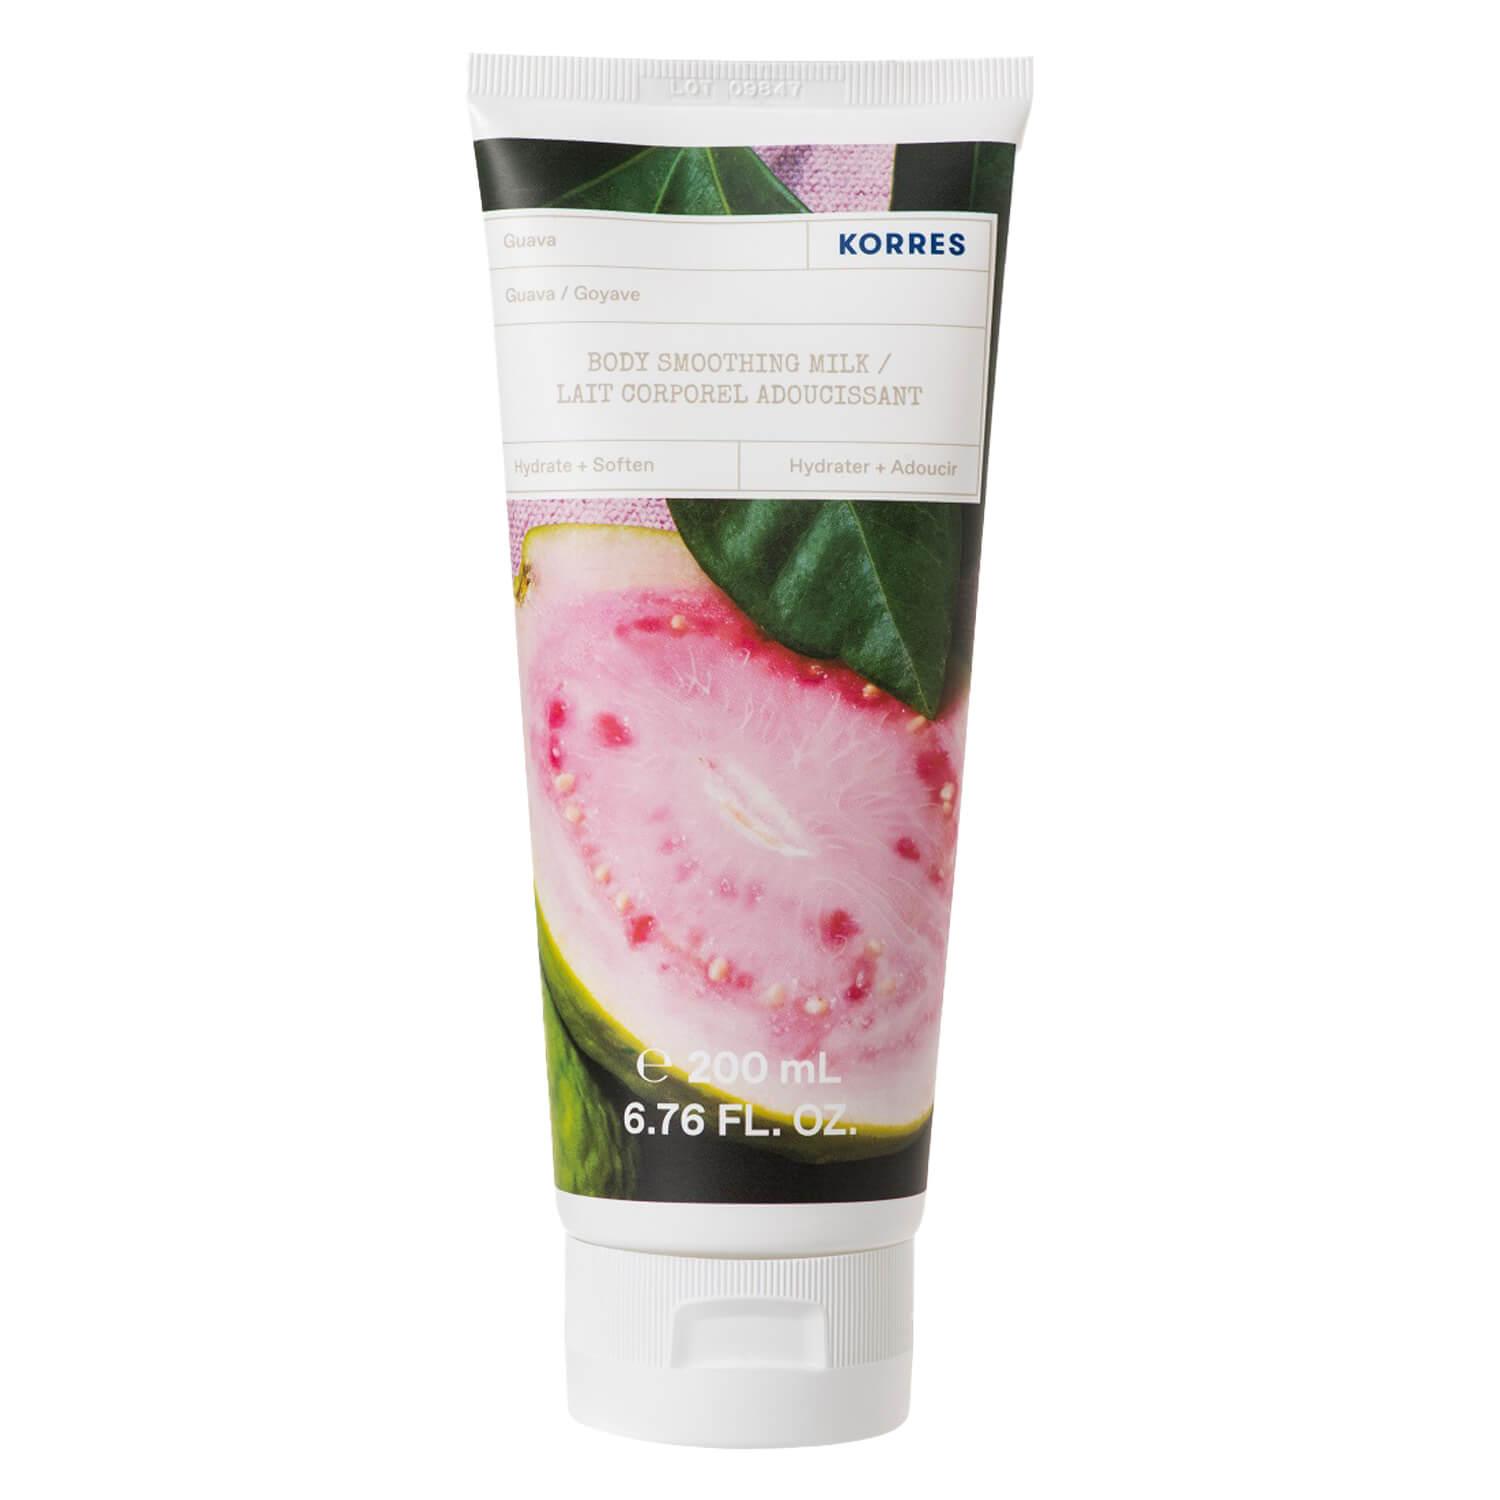 Korres Care - Guava Smoothing Body Milk